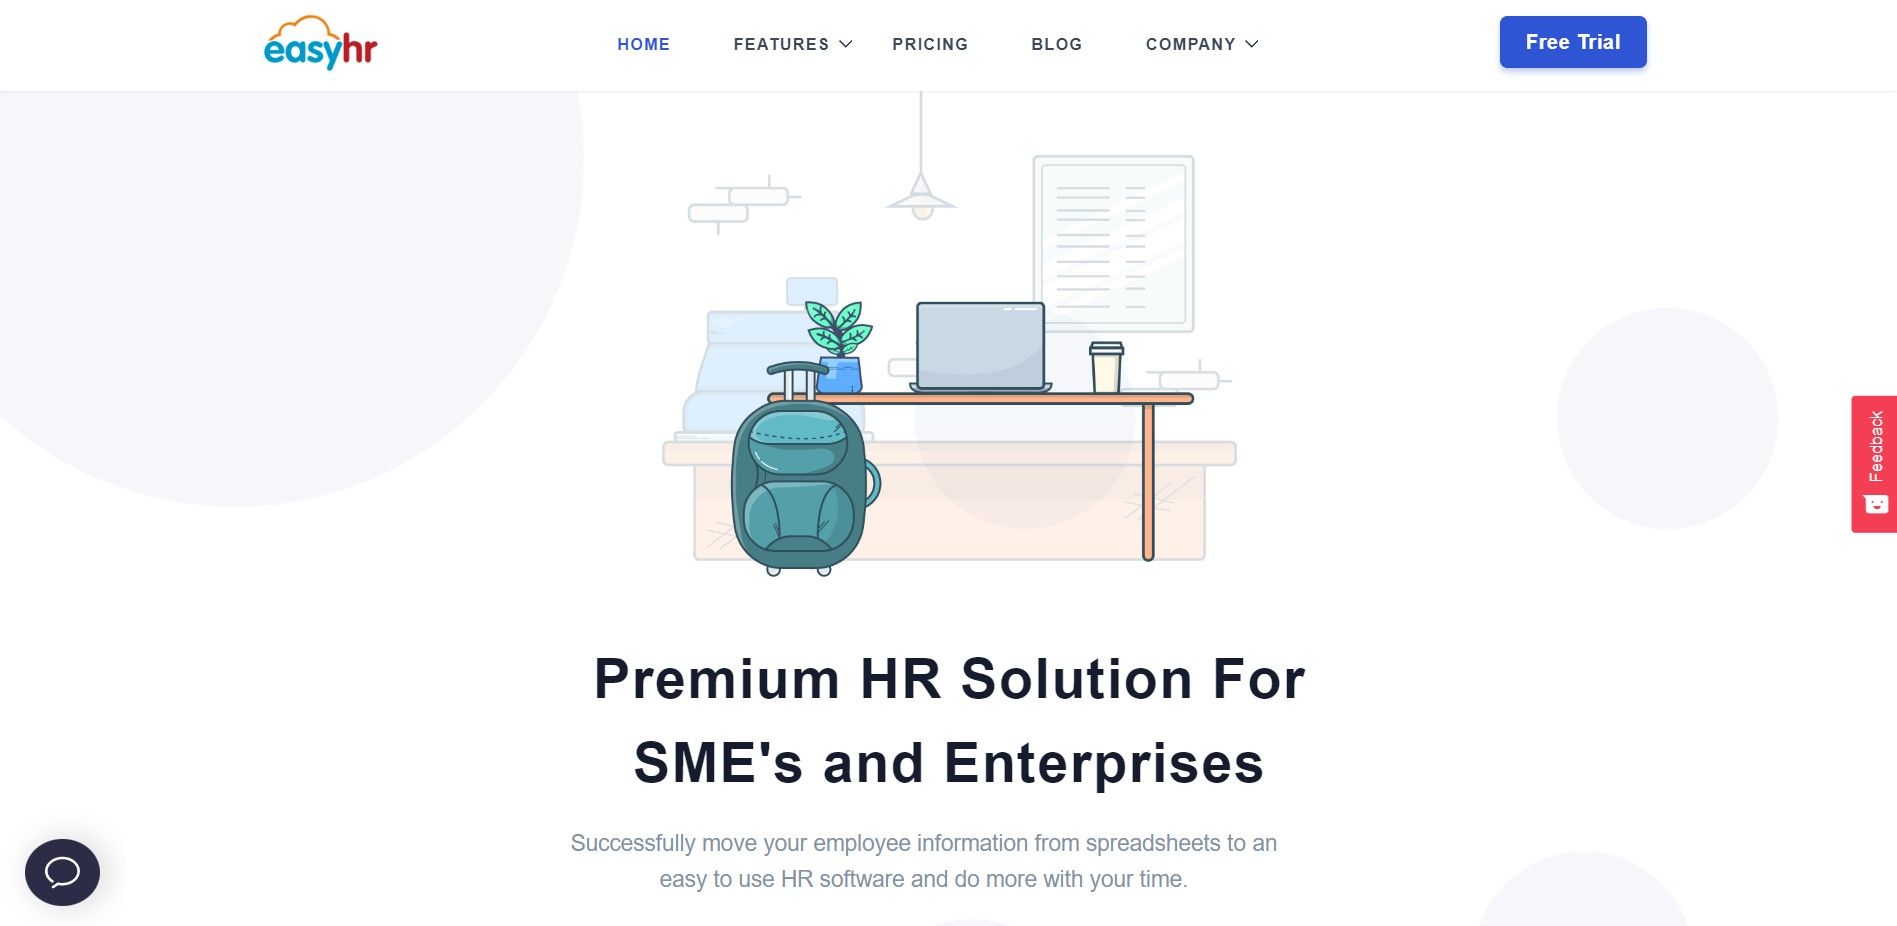 An image of EasyHR mentioning that Premium HR solution for SME's and enterprises